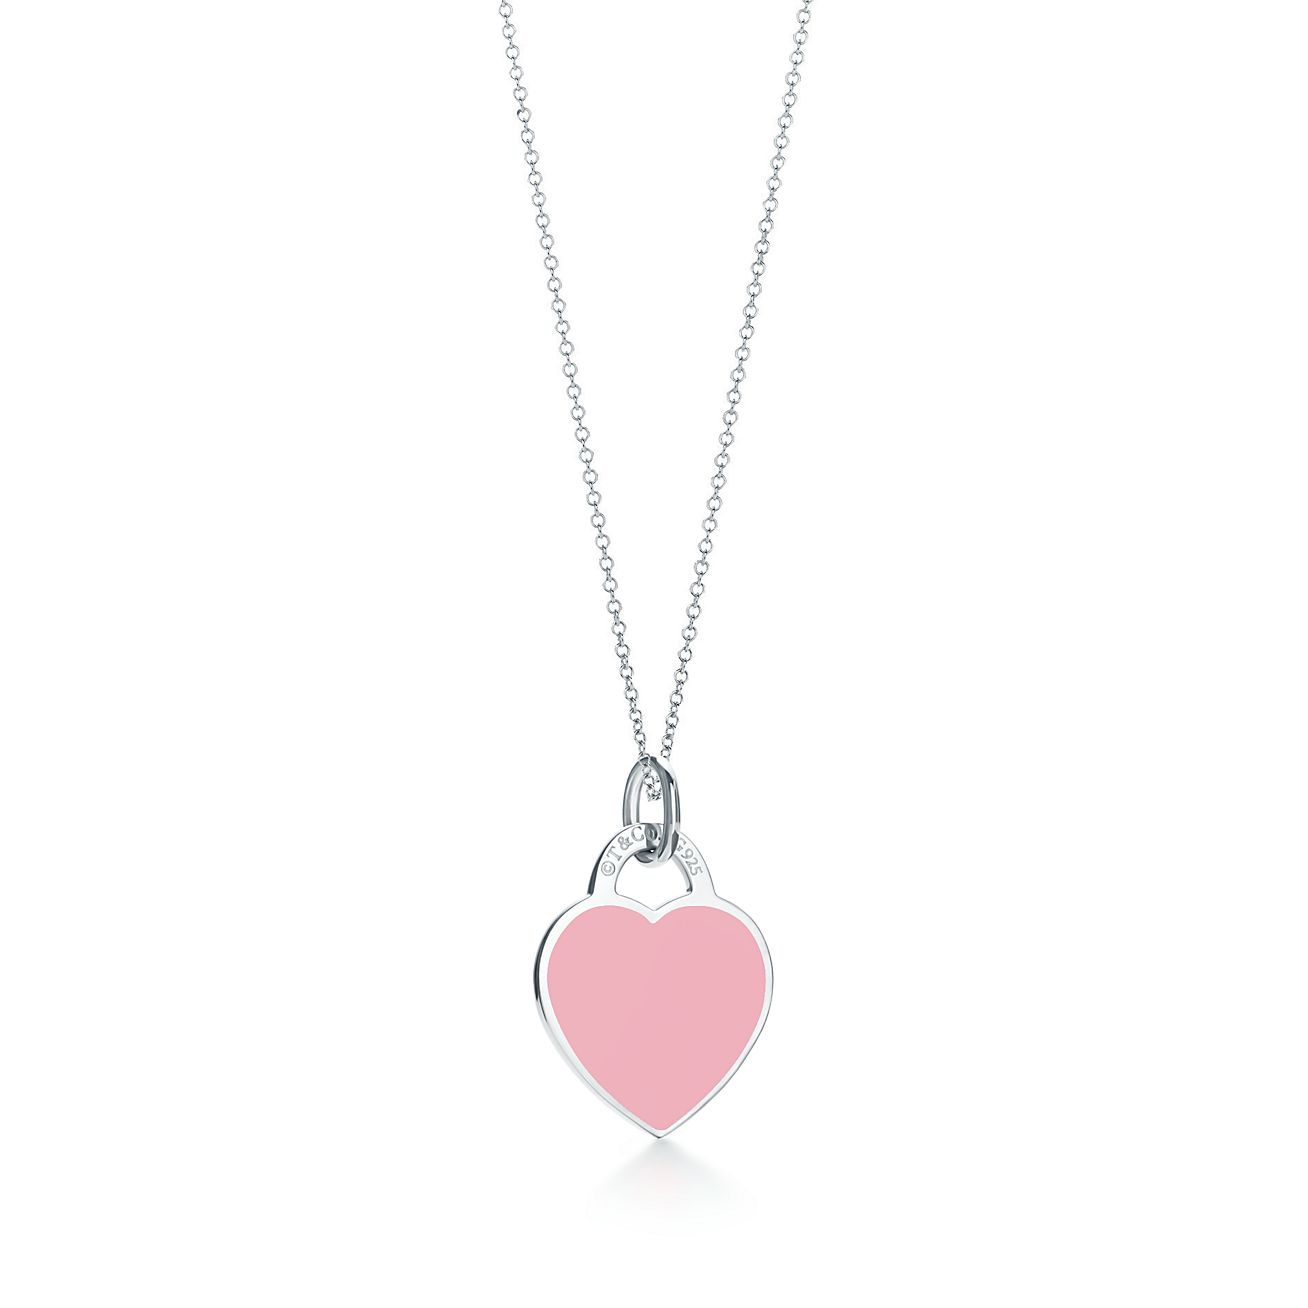 TIFFANY & CO. STERLING SILVER PINK CRYSTAL BEAD STRAND W/HEART PENDANT  NECKLACE | eBay